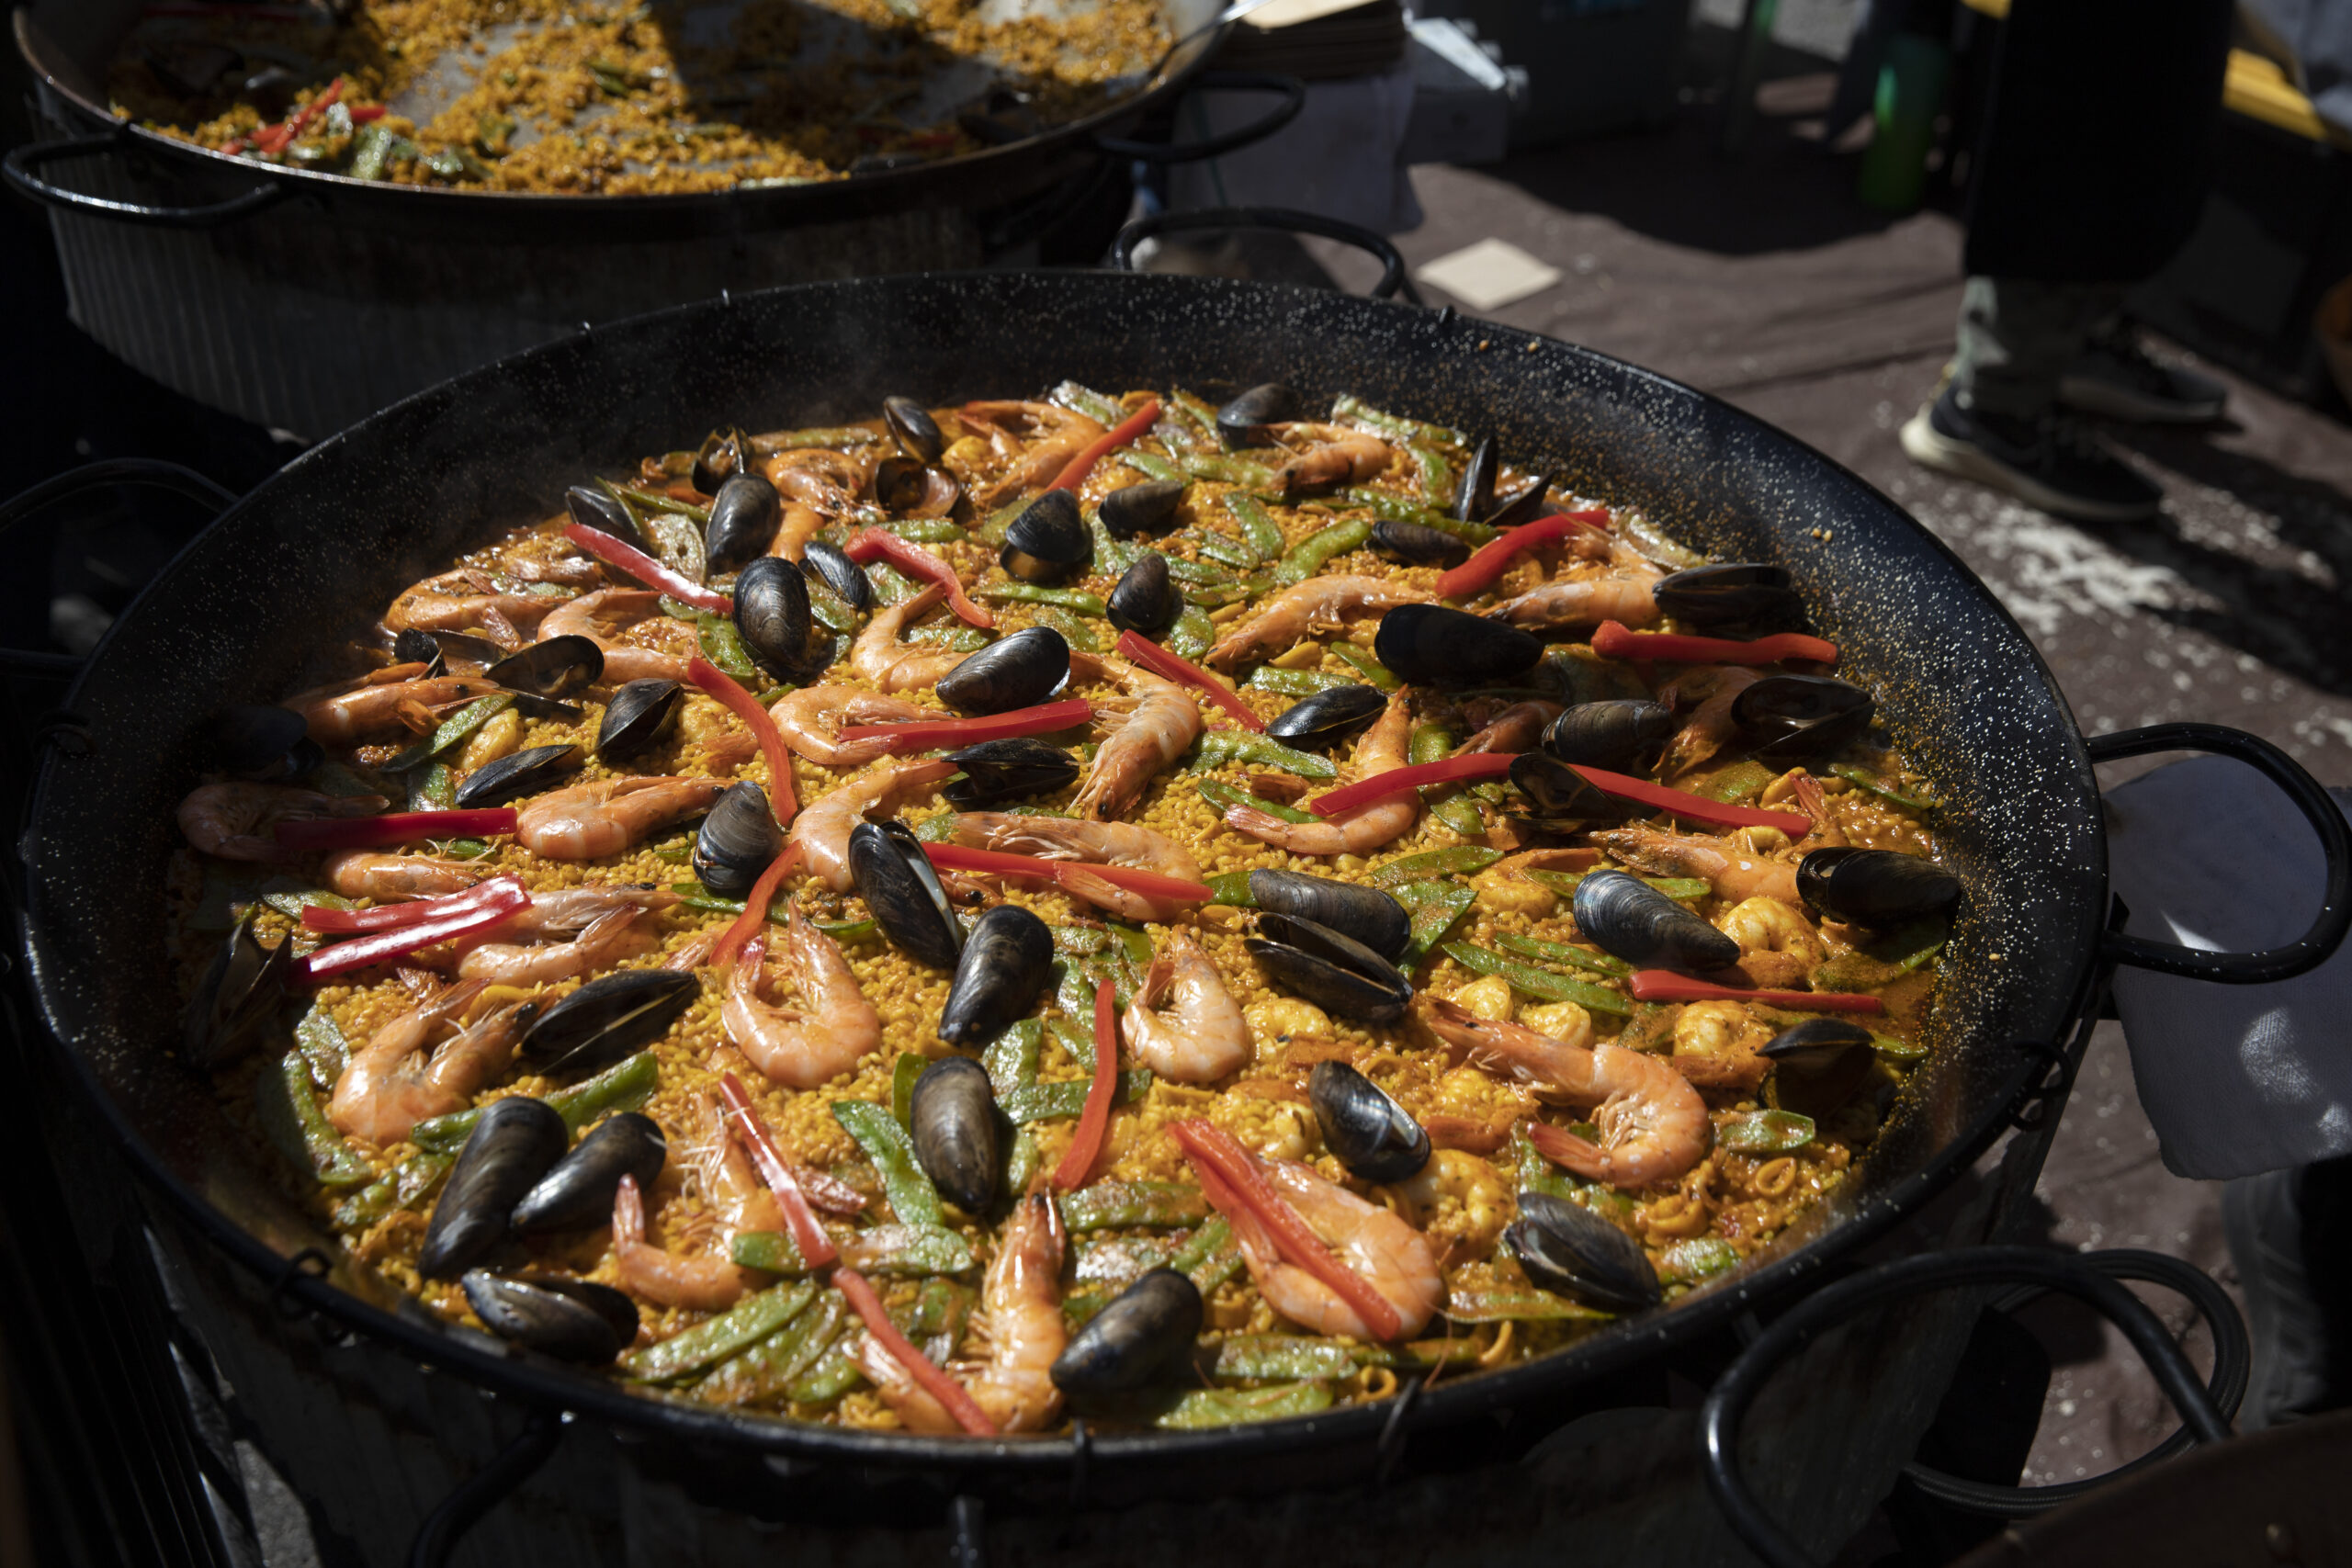 Paella cooking at the Paella Party CT Stall at Prospect Park Smorgasburg.